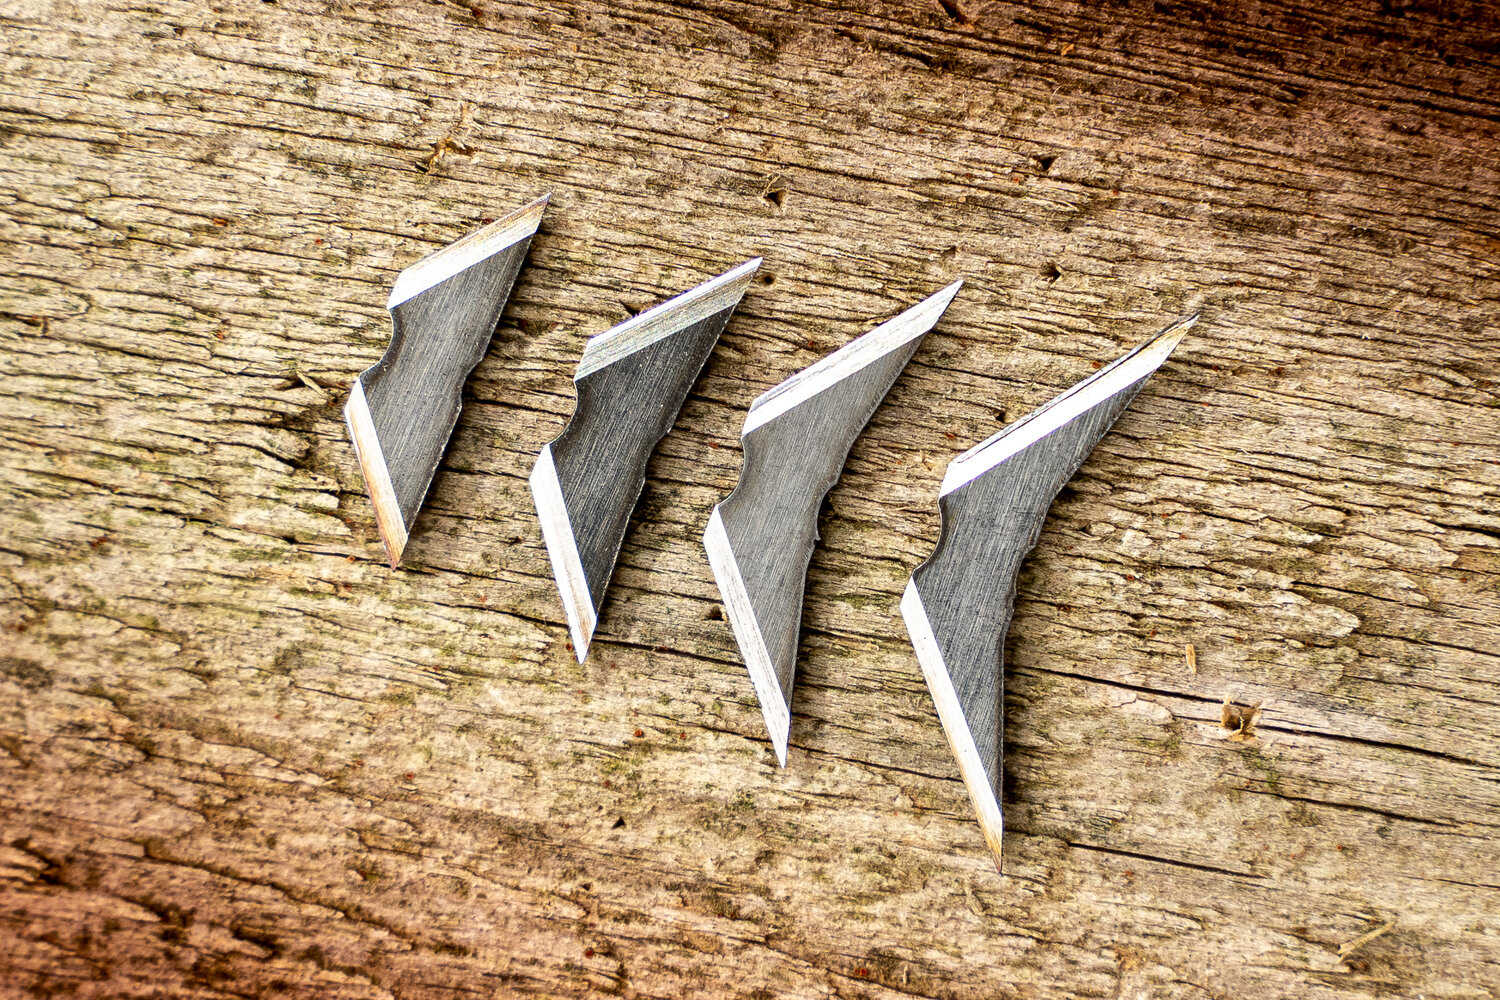 100//125 Grain Broadheads for Crossbow//Compound Bow Crown Broadheads by Thorn